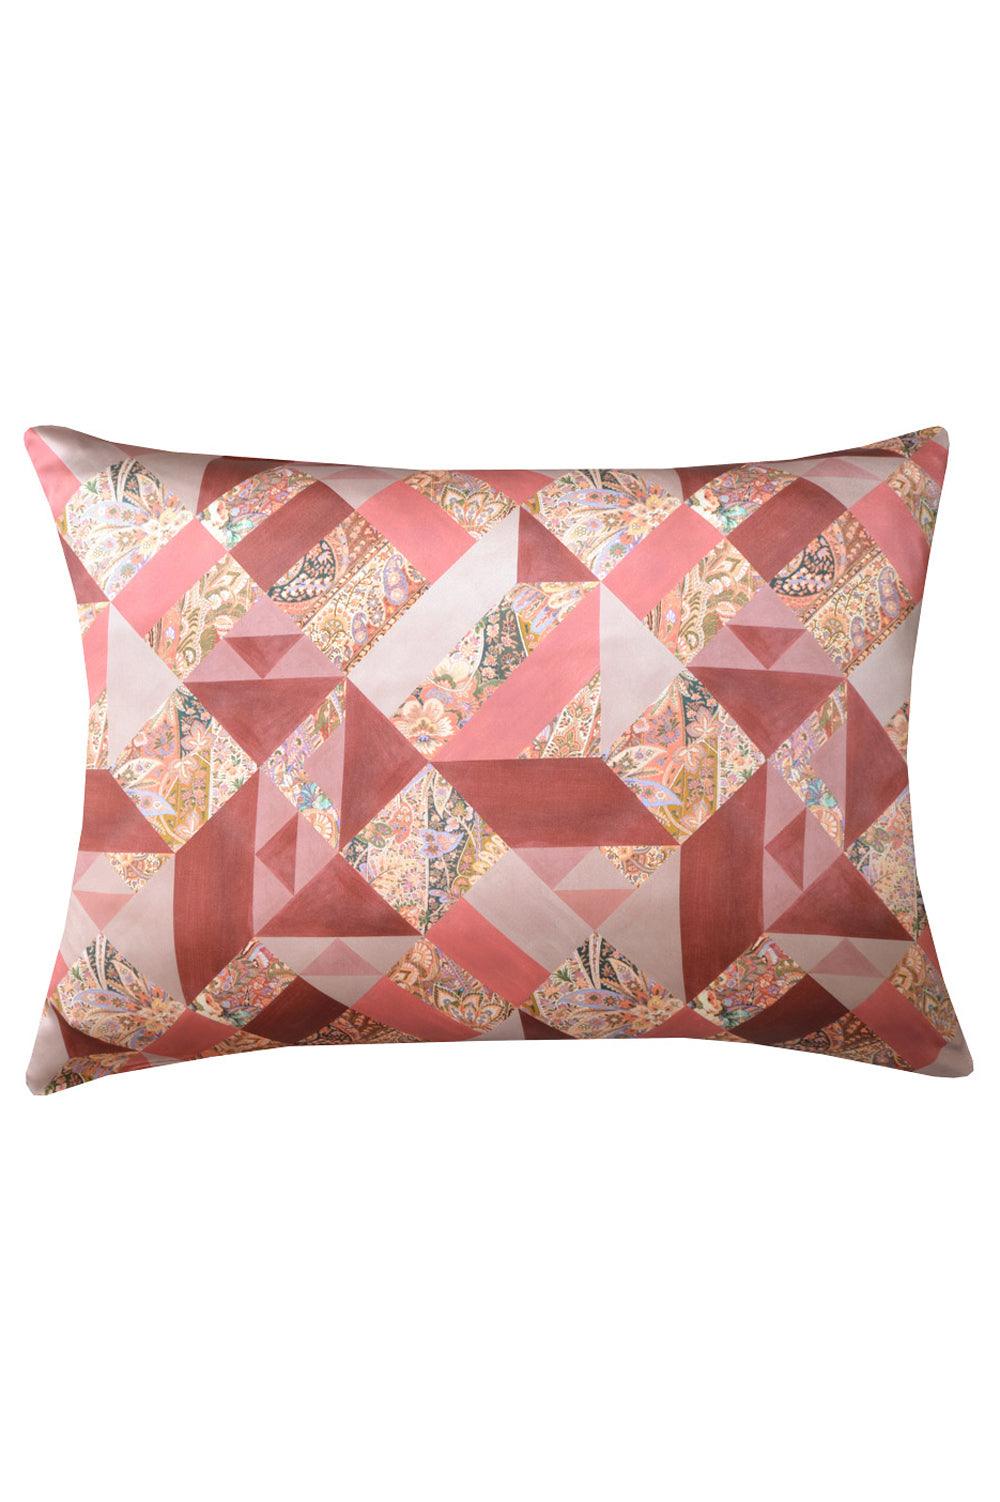 Silk Pillowcase made with Liberty Fabric EASTERN PATCHWORK - Coco & Wolf